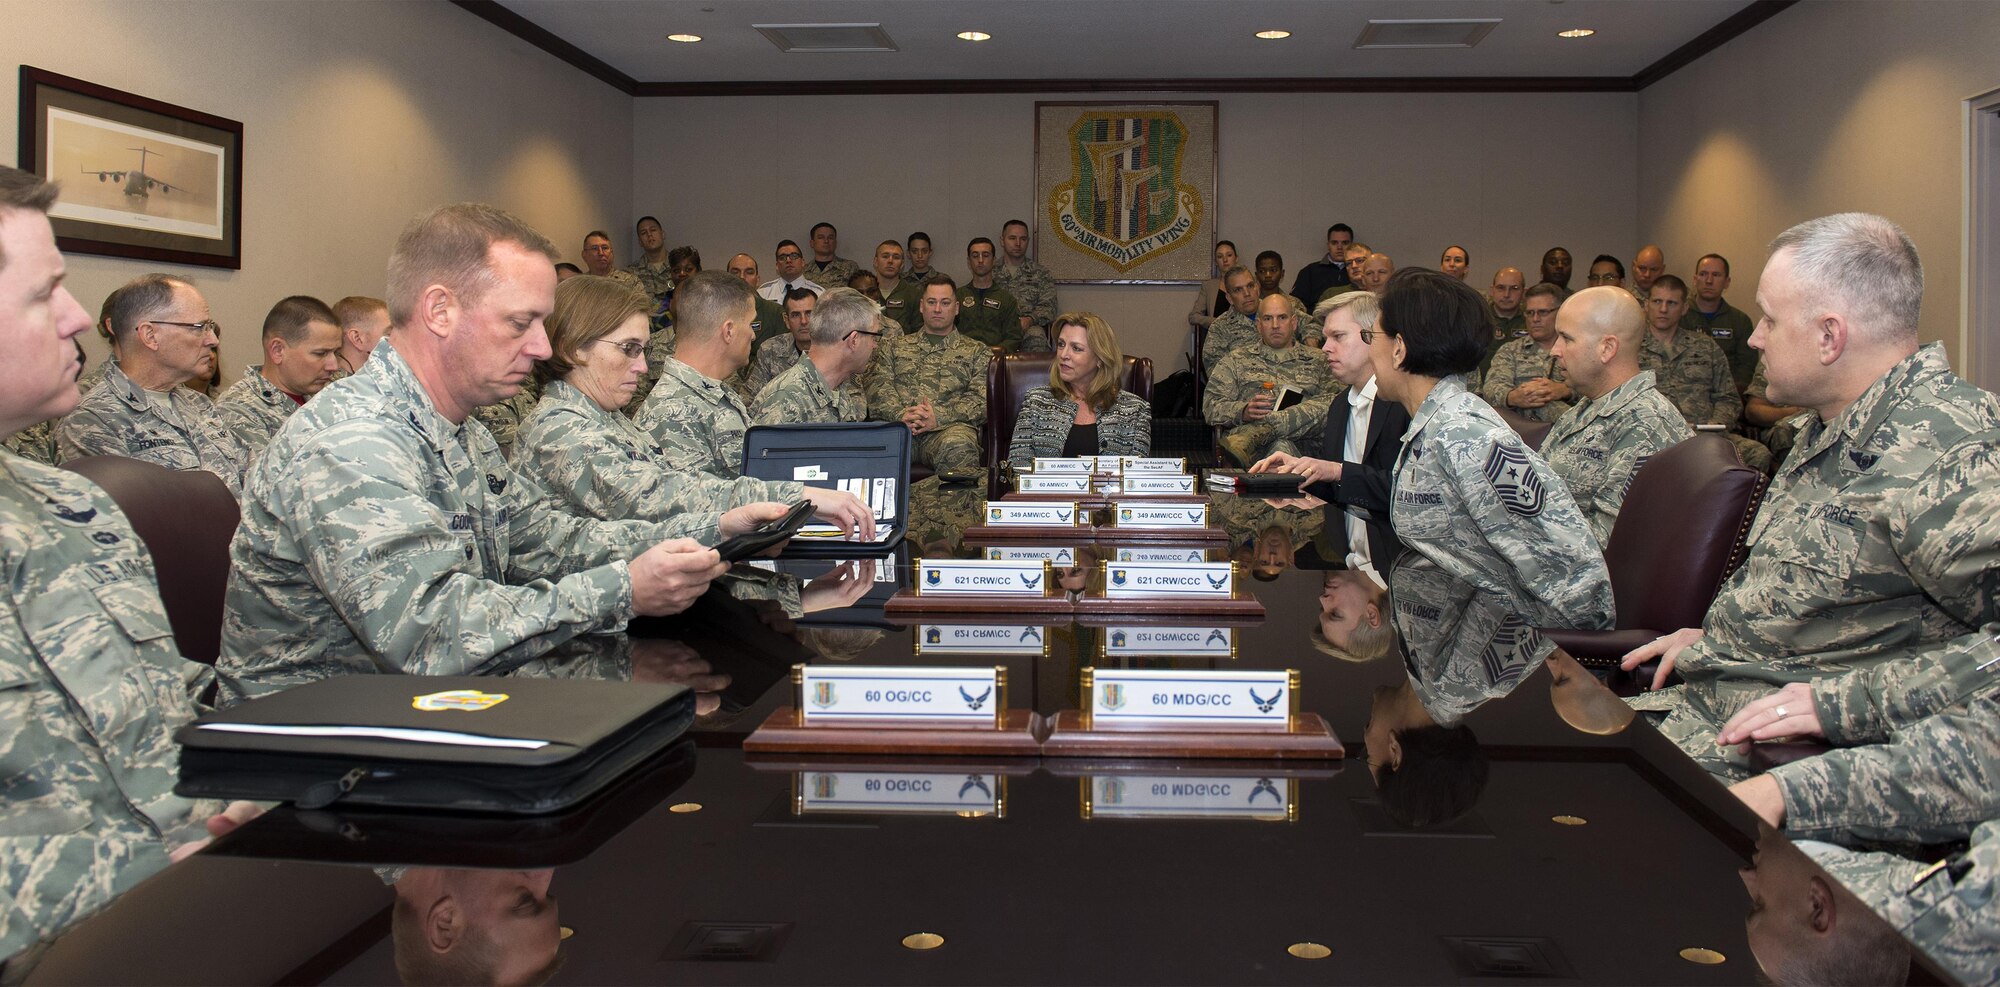 Air Force Secretary Deborah Lee James is given a mission brief by senior base leaders Jan. 8, 2016, at Travis Air Force Base, Calif. The briefing focused on the cornerstone functions of the installation such as the seamless total force integration of three separate wings, the employment of three major mobility weapons systems and Travis AFB’s strategic location serving as the lifeline to the Pacific theater. (U.S. Air Force photo/Heide Couch)